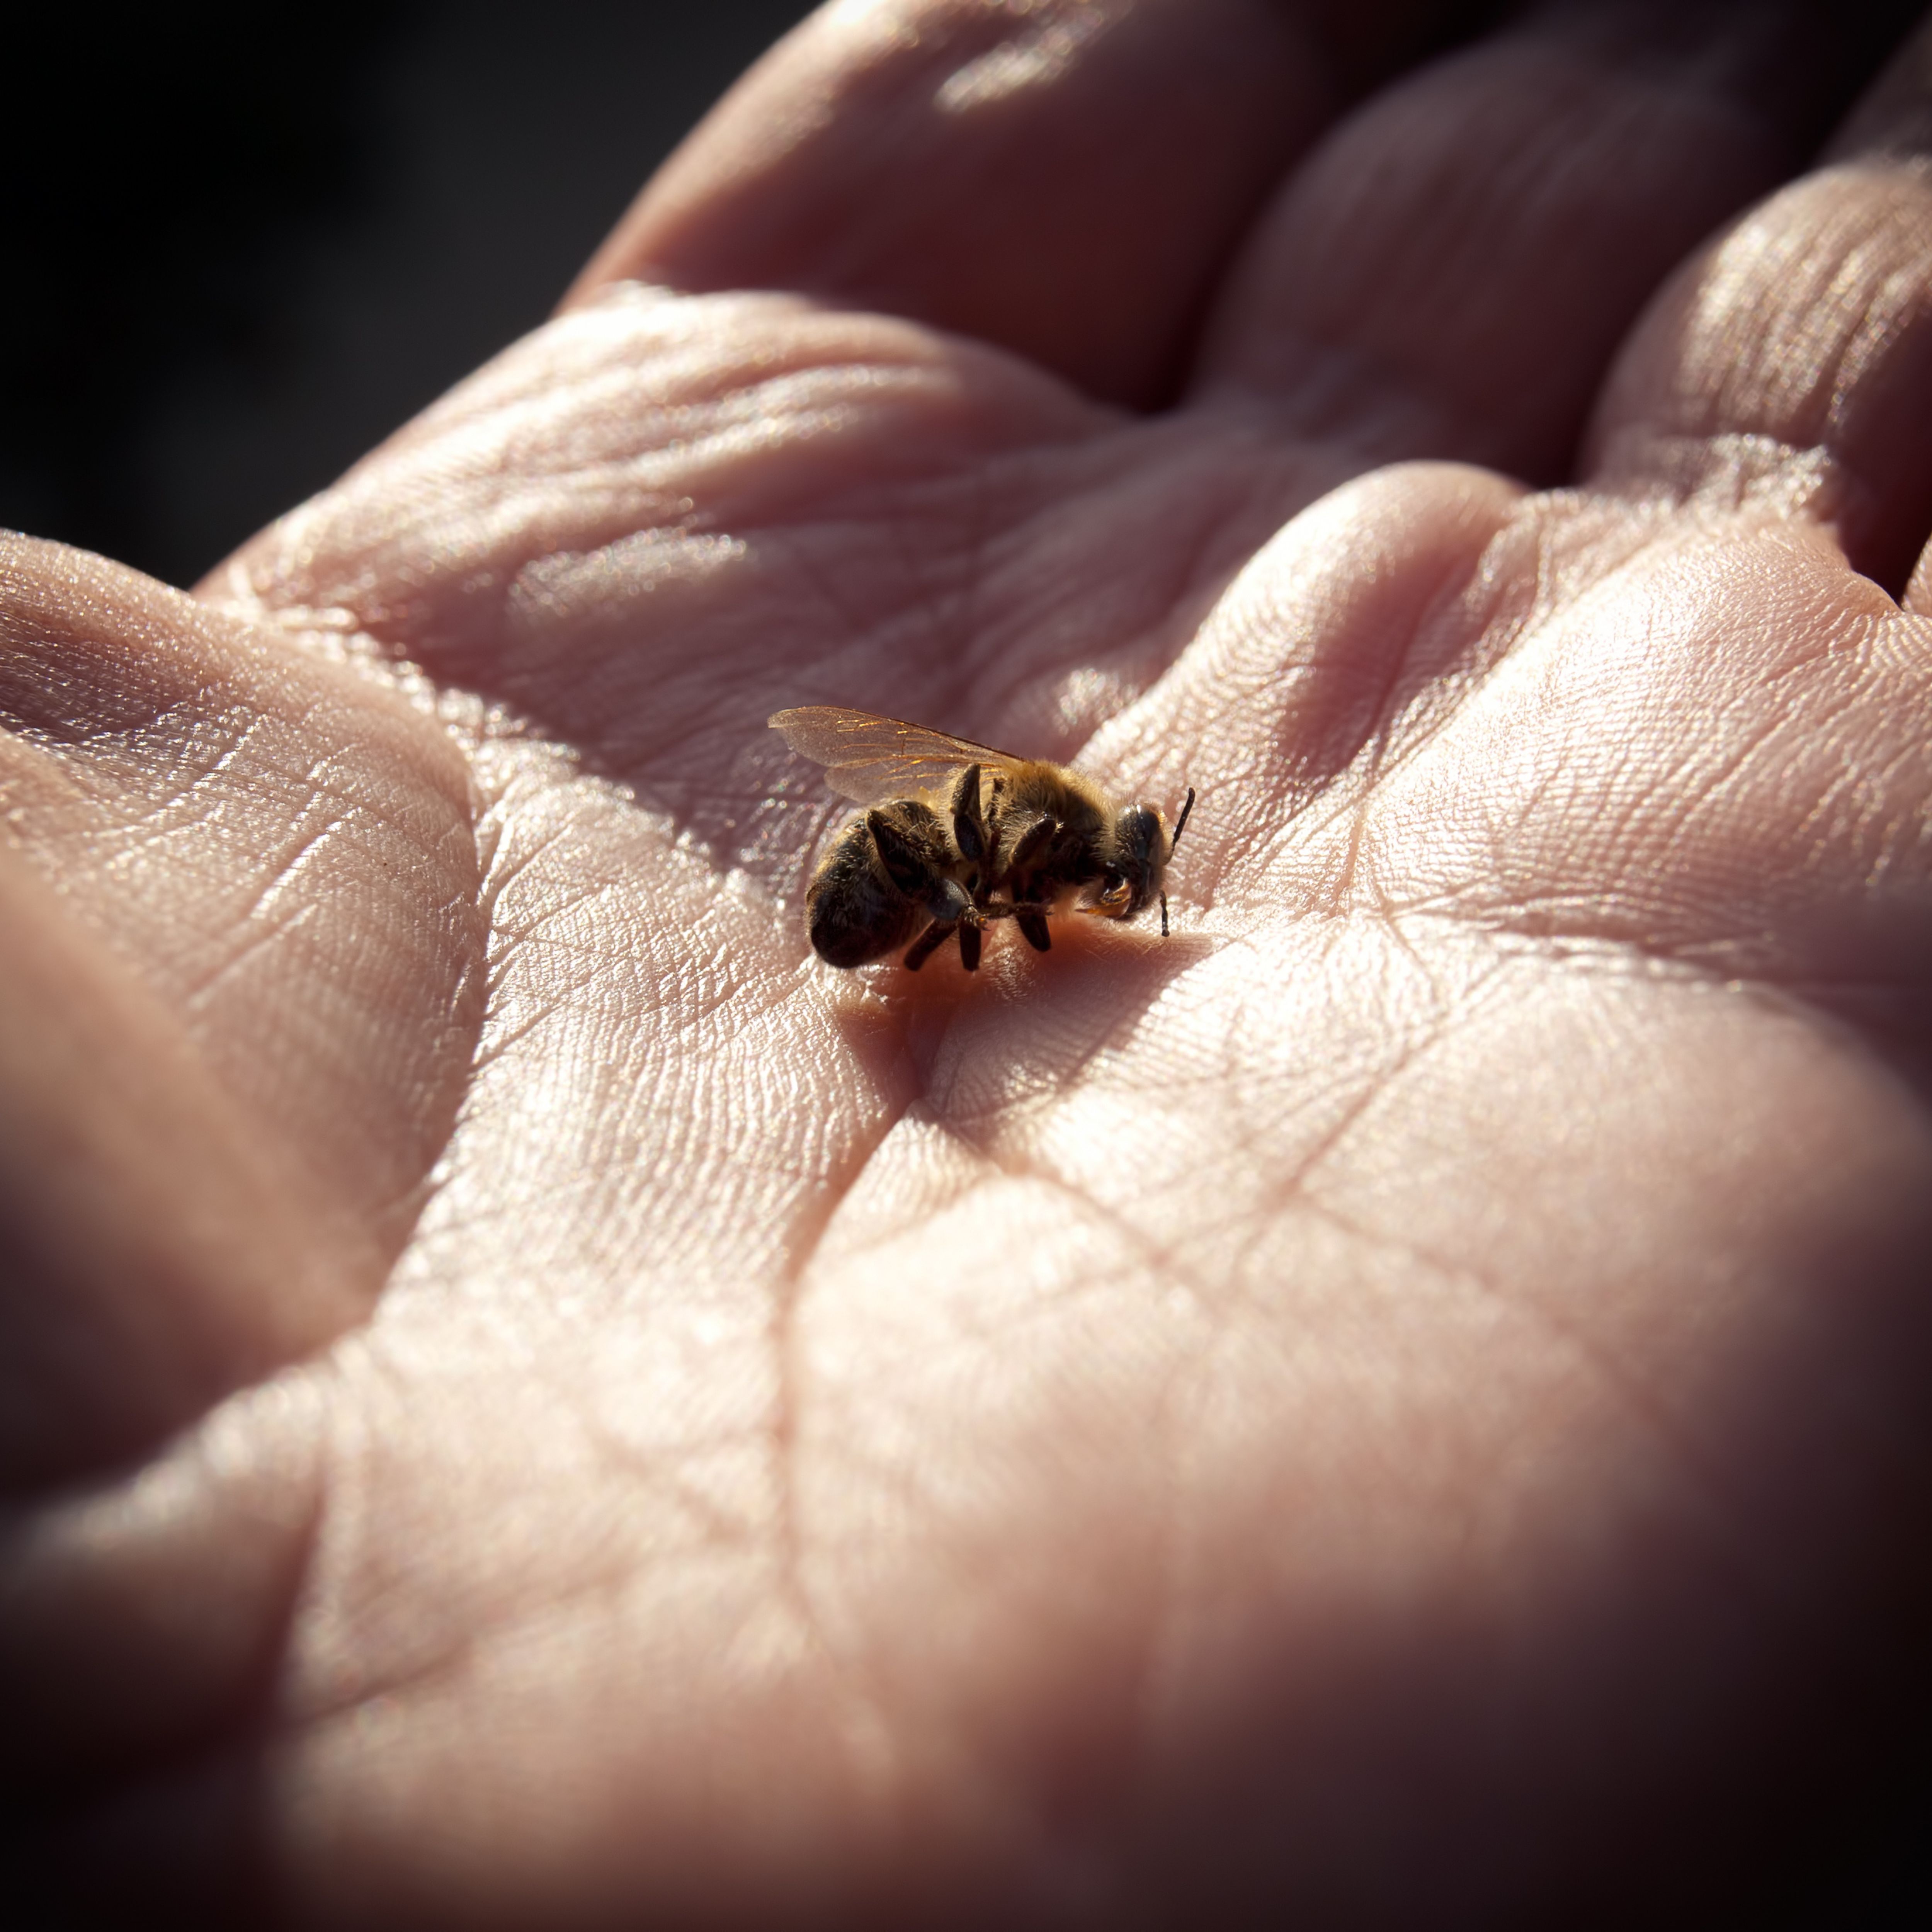 Dying Bee In a Persons Hand